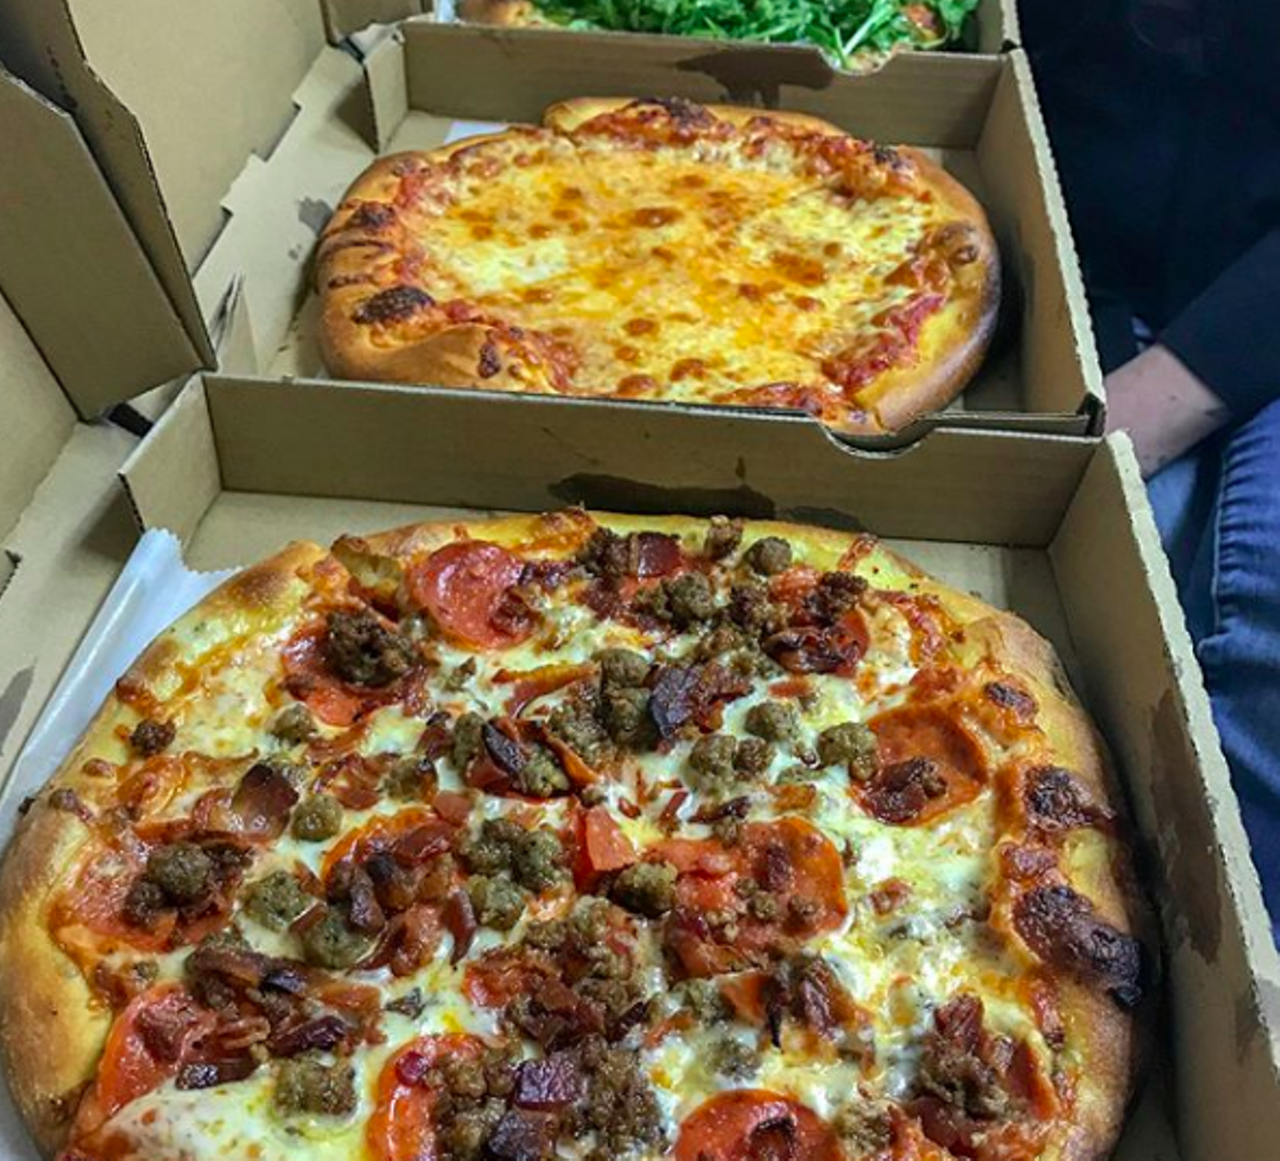 The Last Slice
3021 MacArthur View, (210) 994-5661, thelastslice.net
Order by the slice (duh) or by the pie – there’s even happy hour! Pair your pie with wings or a sub for a true feast. Best yet, you can feast on this goodness via DoorDash.
Photo via Instagram / franktheref